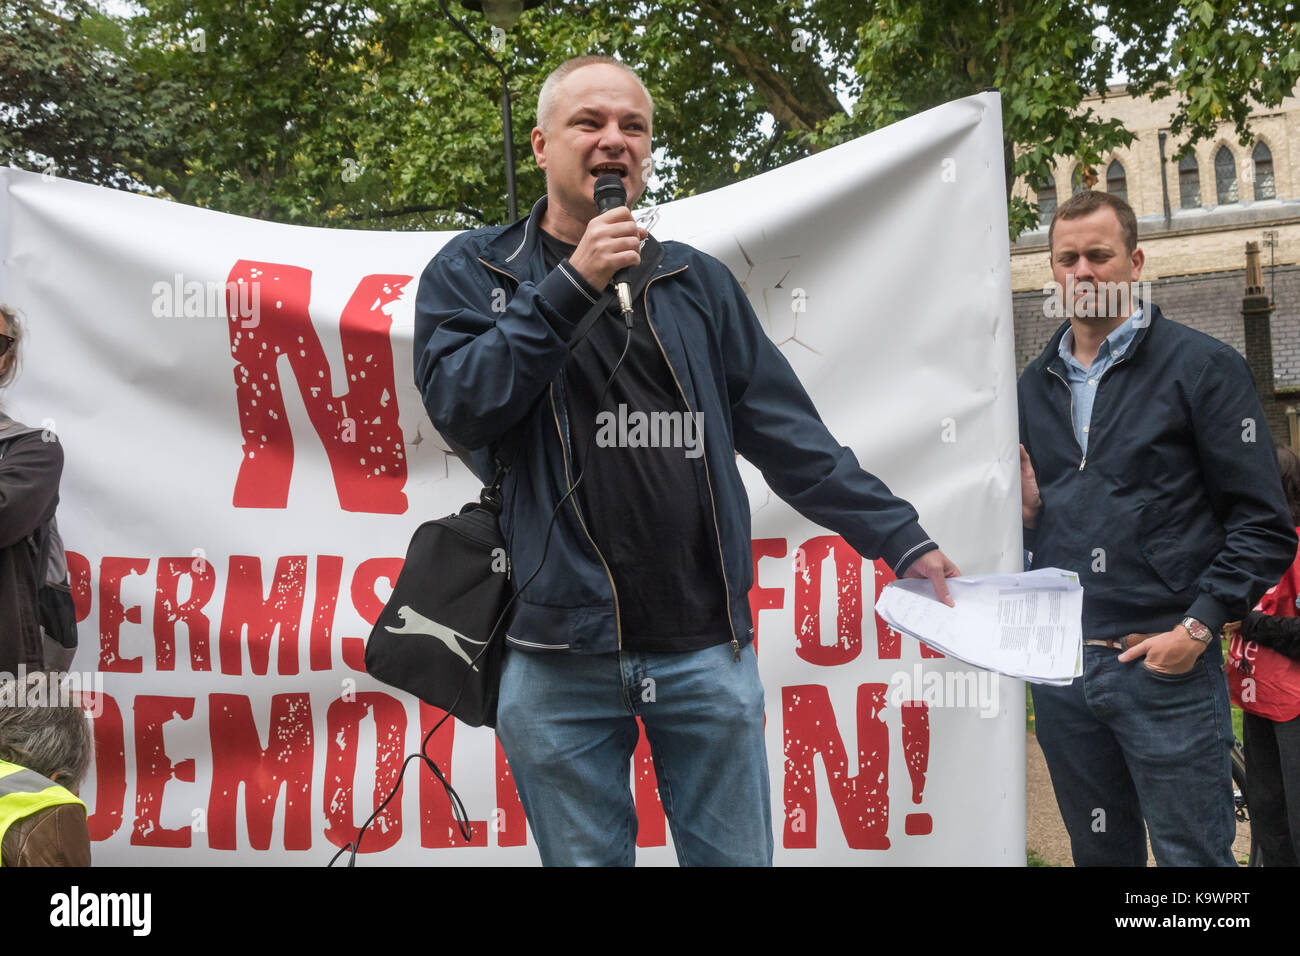 London, UK. 23rd Sep, 2017. London, UK. 23rd September 2017. A resident from Broadwater Farm, which after getting a bad repuation has become one of the most popular and safest council estates in Lodnon speaks at the rally in Tottenham before the march to Finsbury Park against the so called Haringey Development Vehicle, under which Haringey Council is making a huge transfer of council housing to Australian multinational Lendlease, who will demolish the estate. This will result in the imminent demolition of over 1,300 council homes on the Northumberland Park estate, followed by similar los Stock Photo